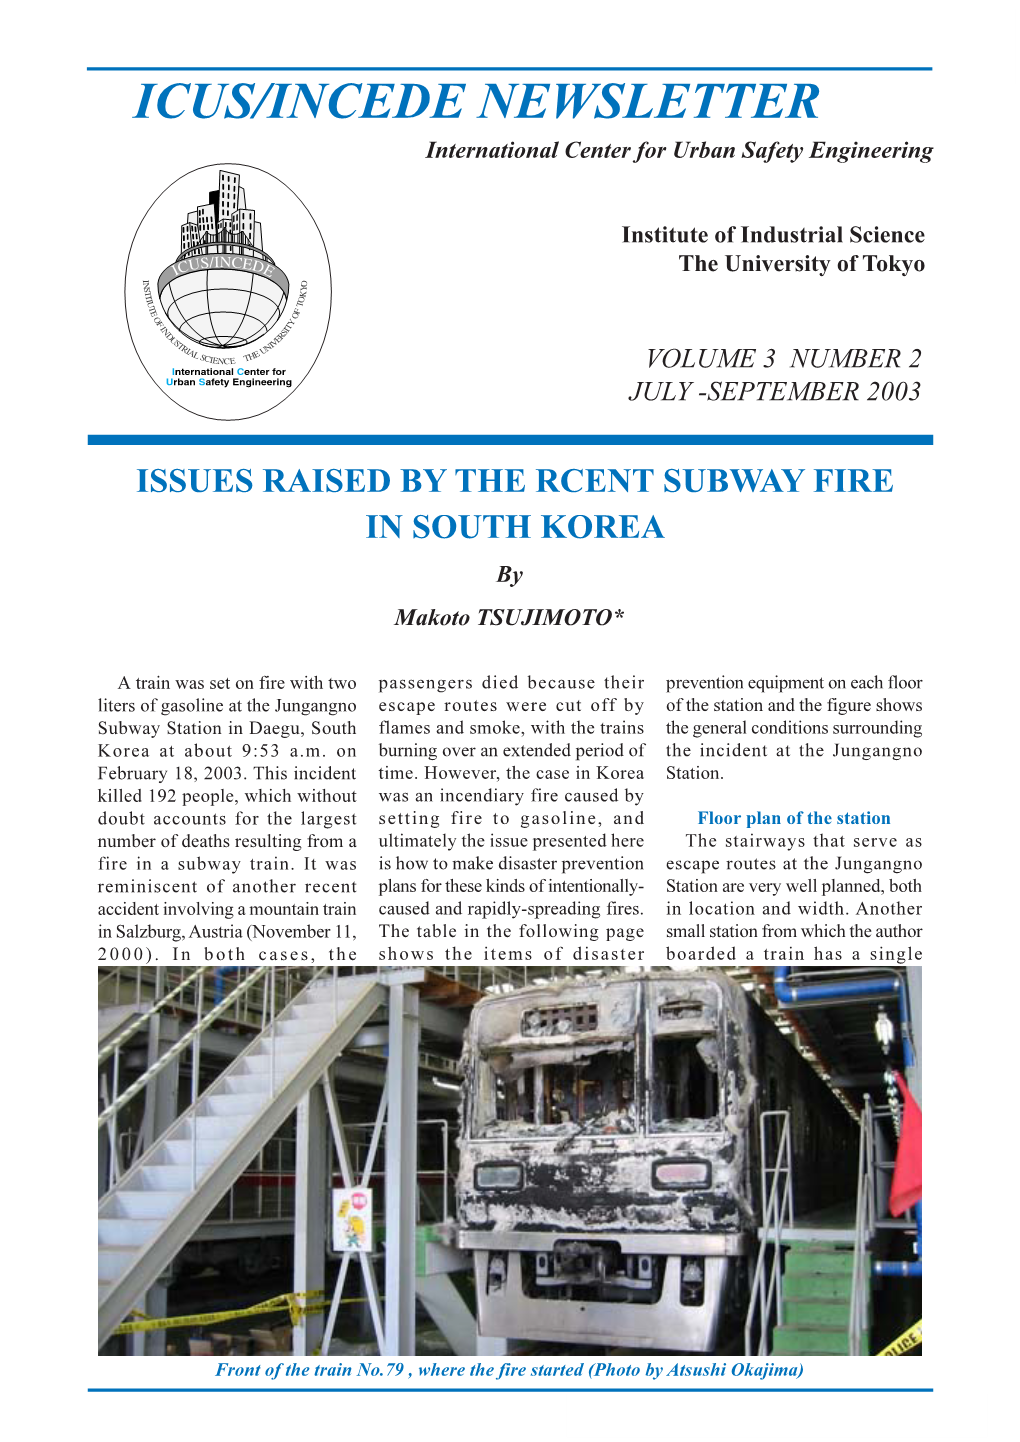 ICUS/INCEDE NEWSLETTER International Center for Urban Safety Engineering